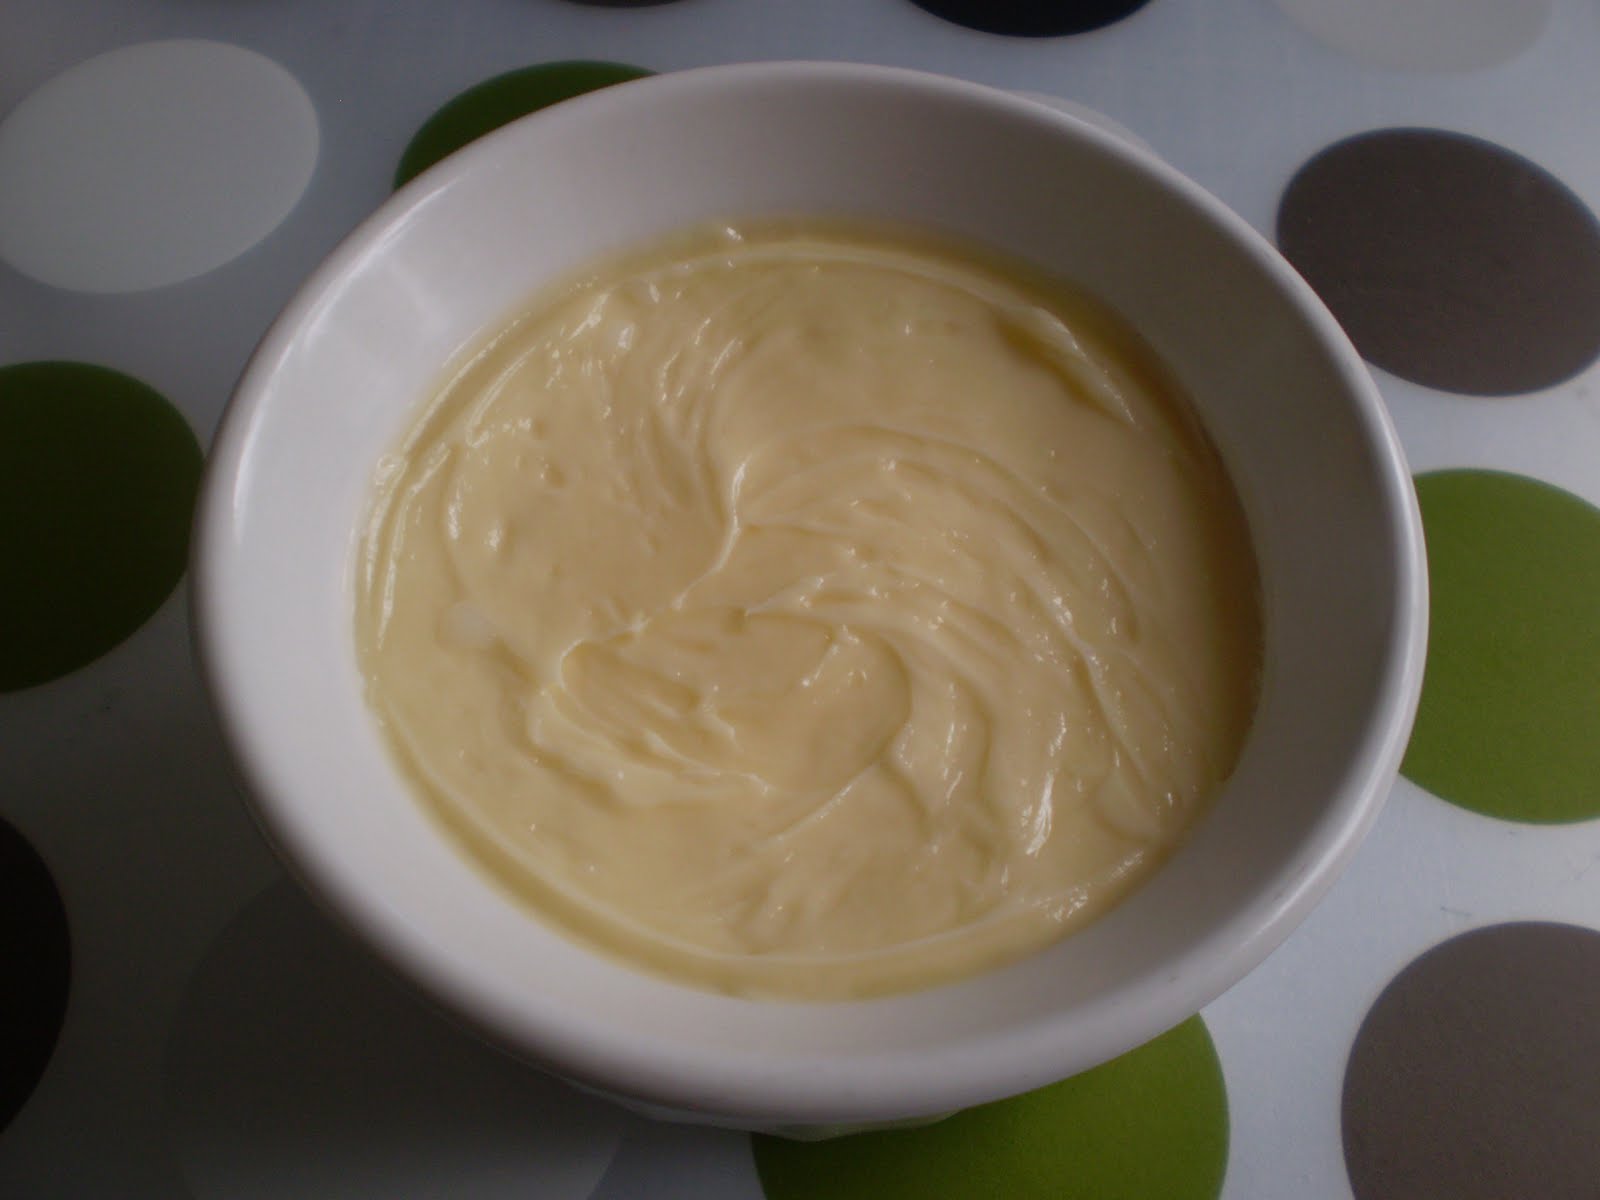 The finished butter in a round ramekin